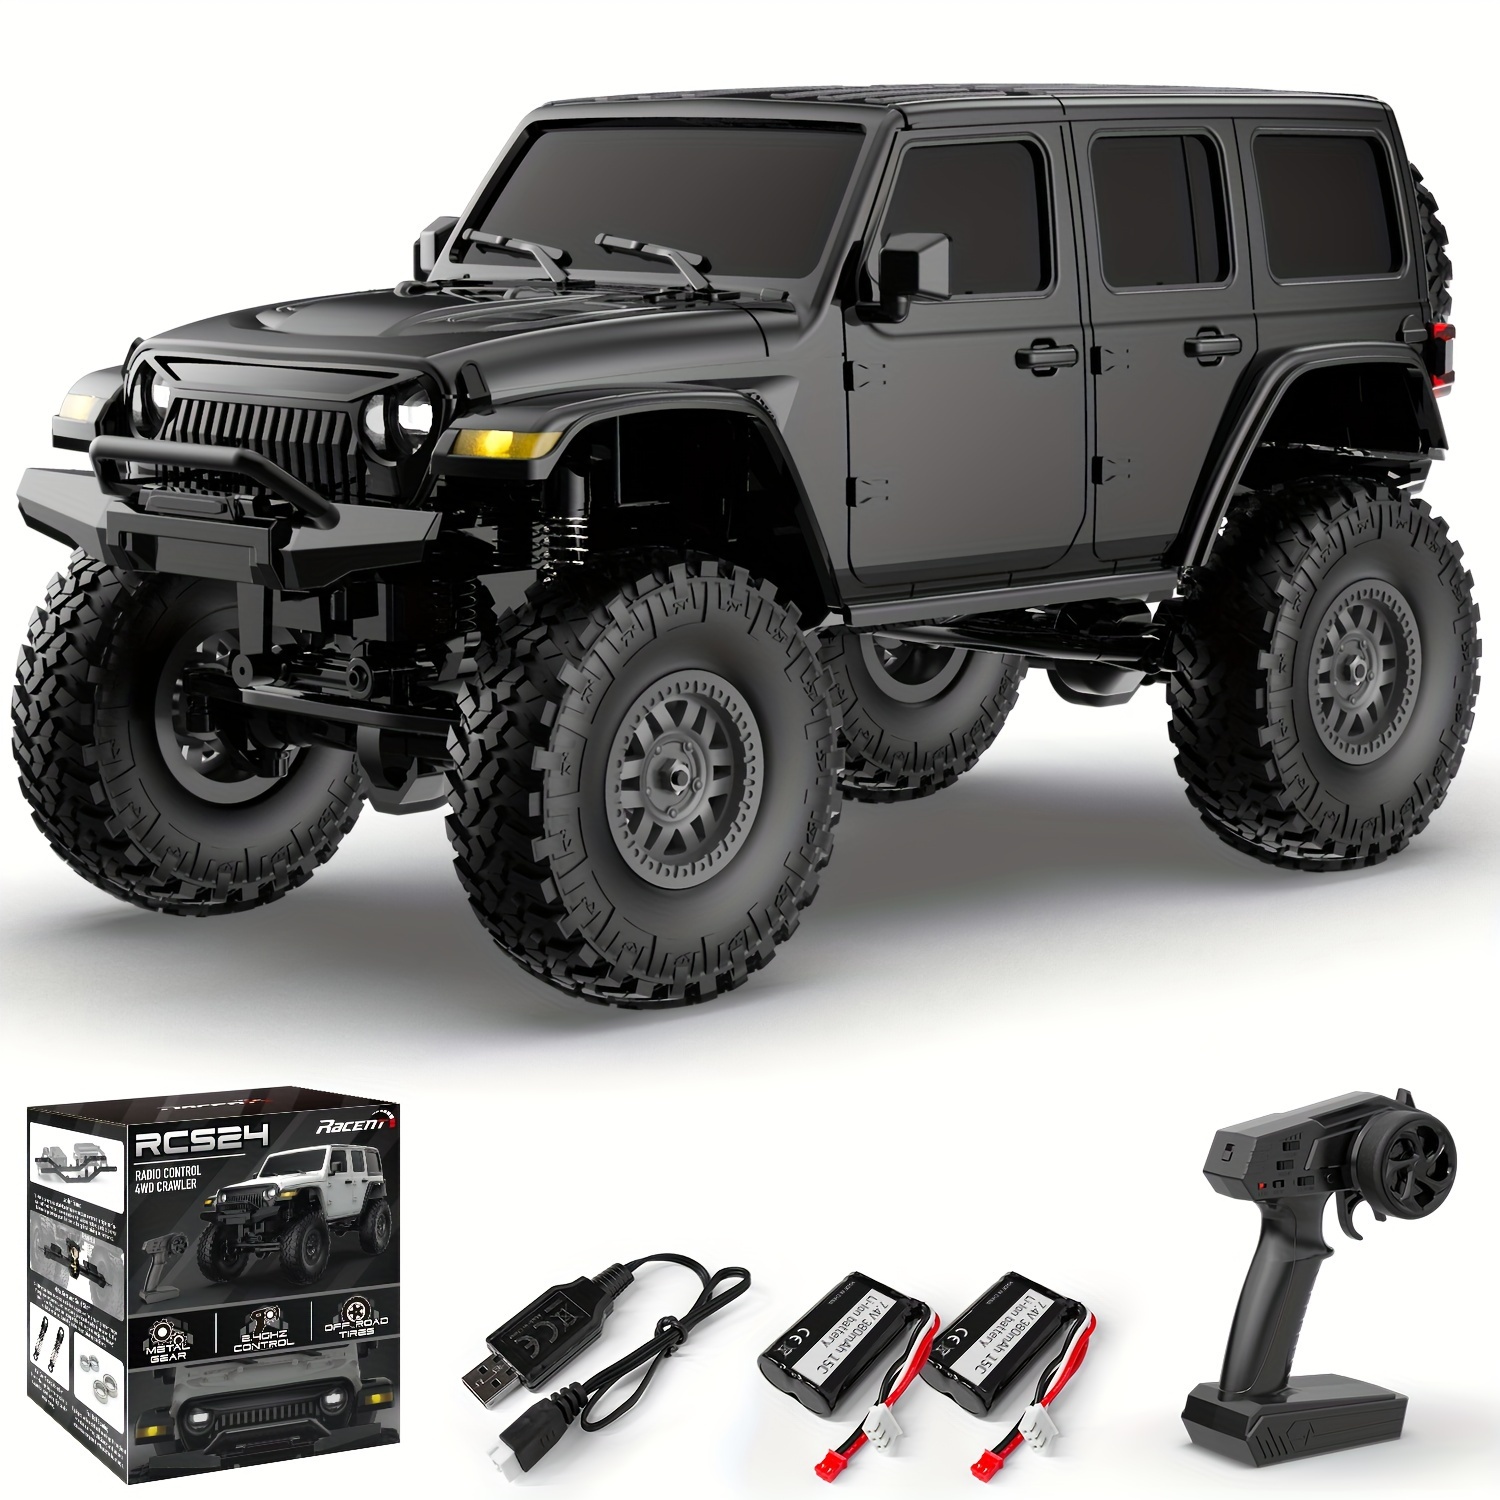 

1/24 Rc Crawler - Off Road 4x4 All Terrain Remote Control Truck With Led Lights & 2 Batteries, Hobby Grade Toys For Boys Adults